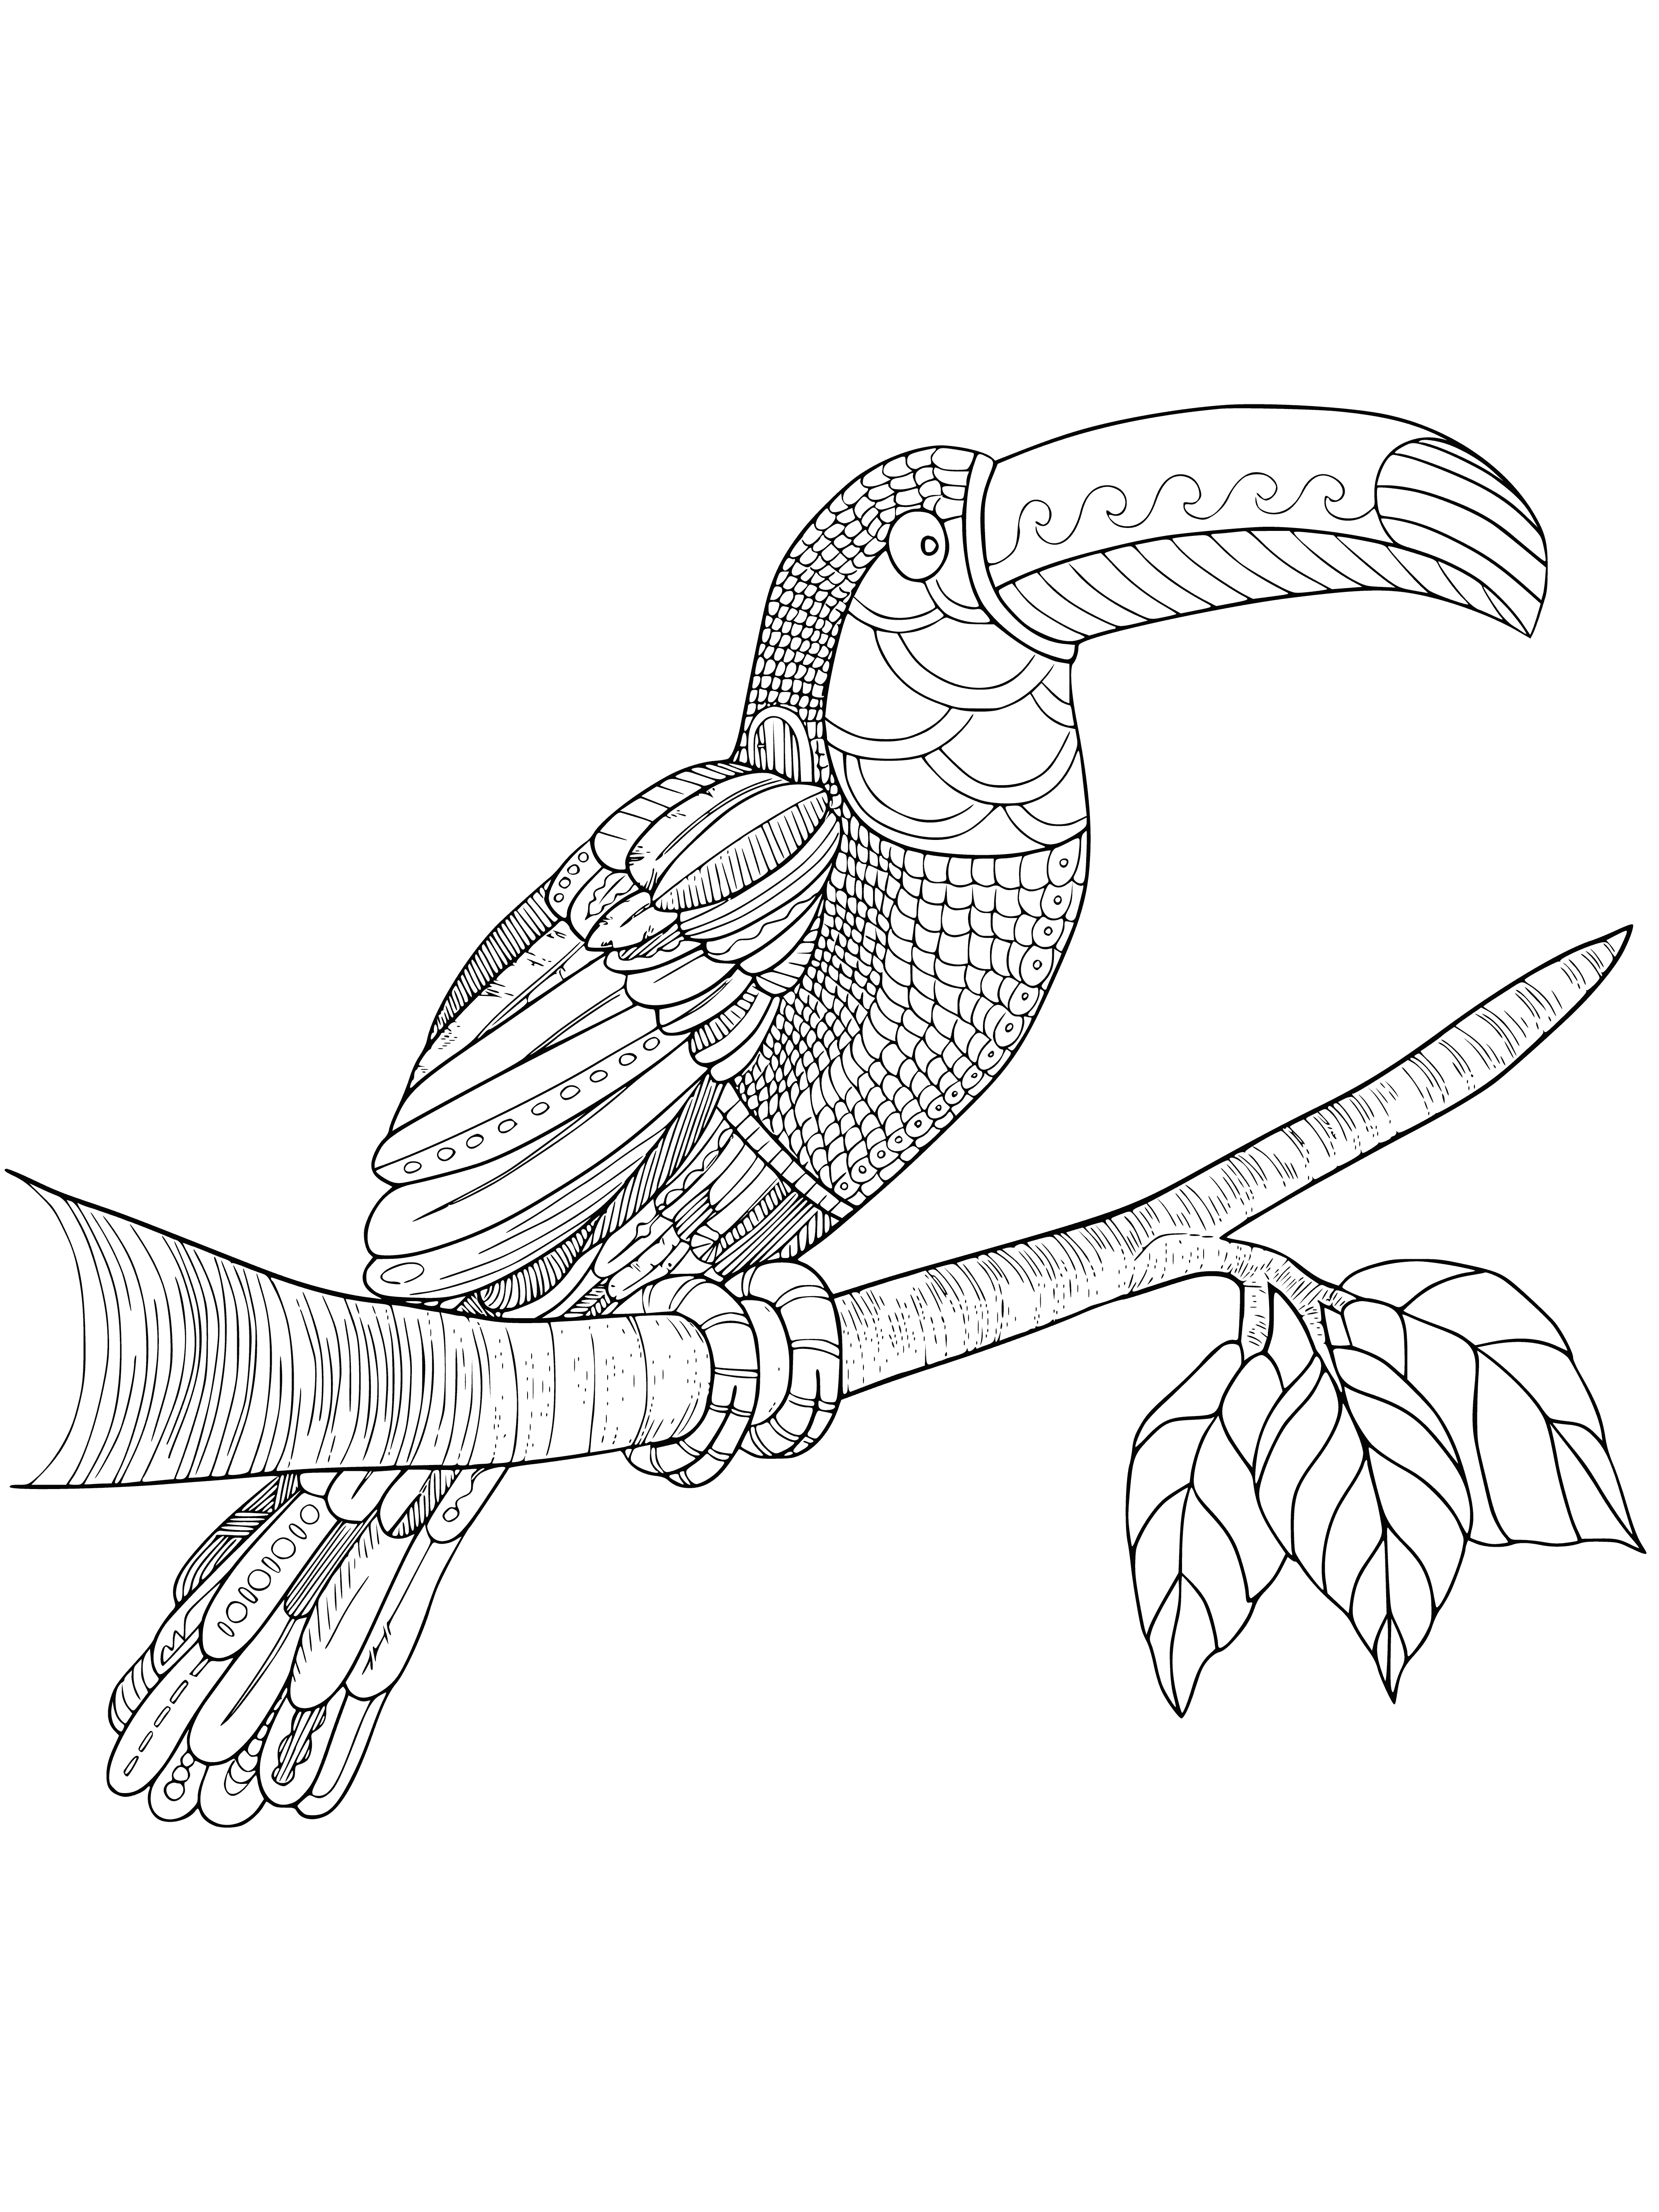 Toucan on a branch coloring page